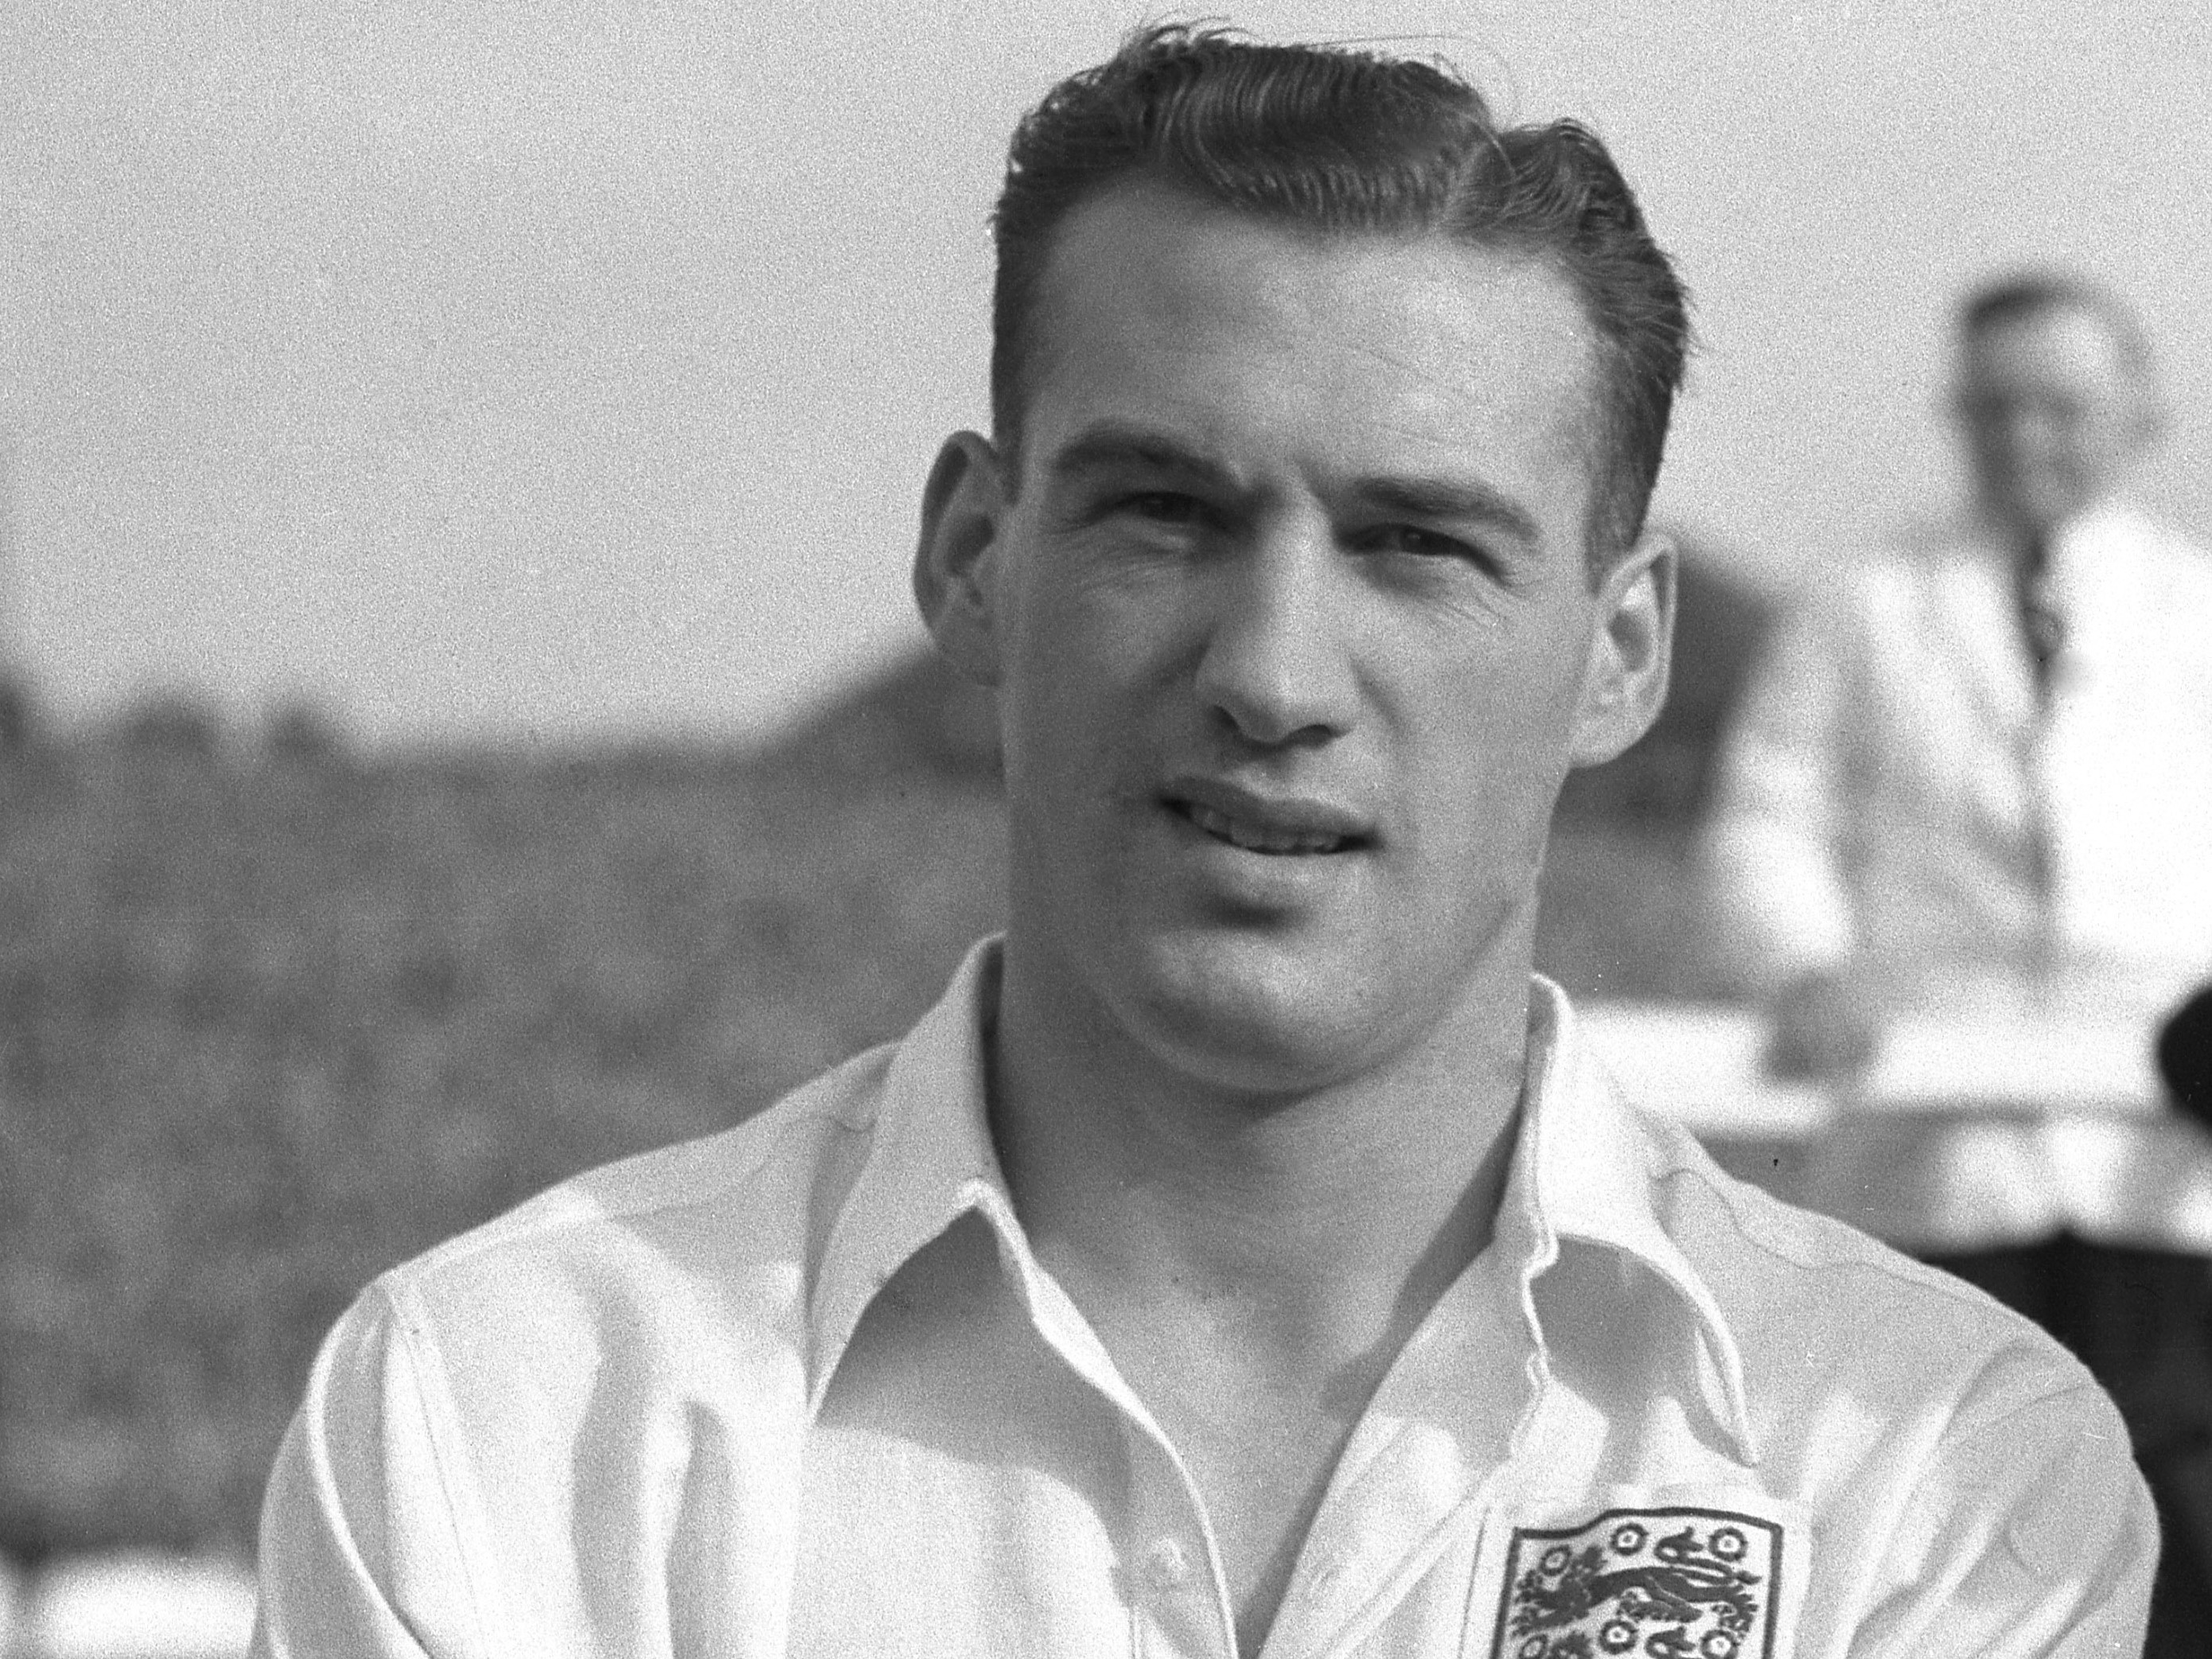 Nat Lofthouse scored two of his 30 England goals in the World Cup draw with Belgium.